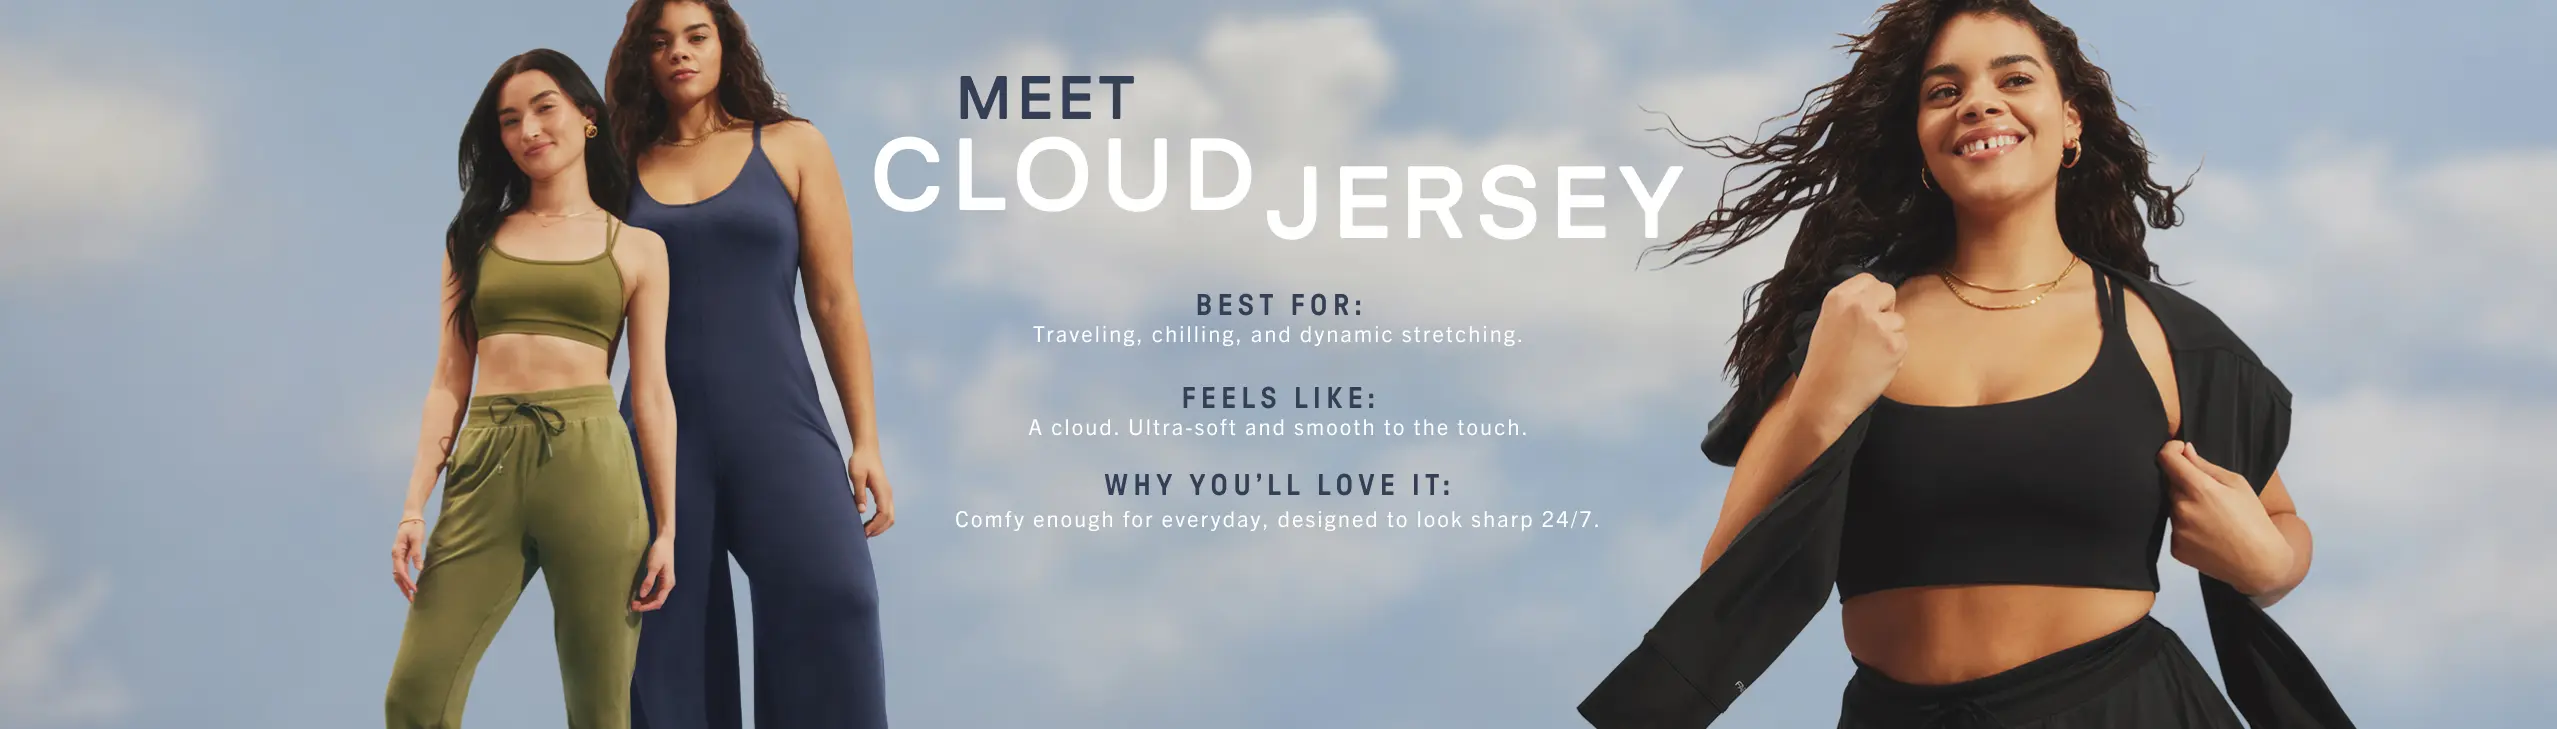 Meet Cloud Jersey. Best for travel, feels ultra-soft, and you'll love it because its comfy for everyday wear.